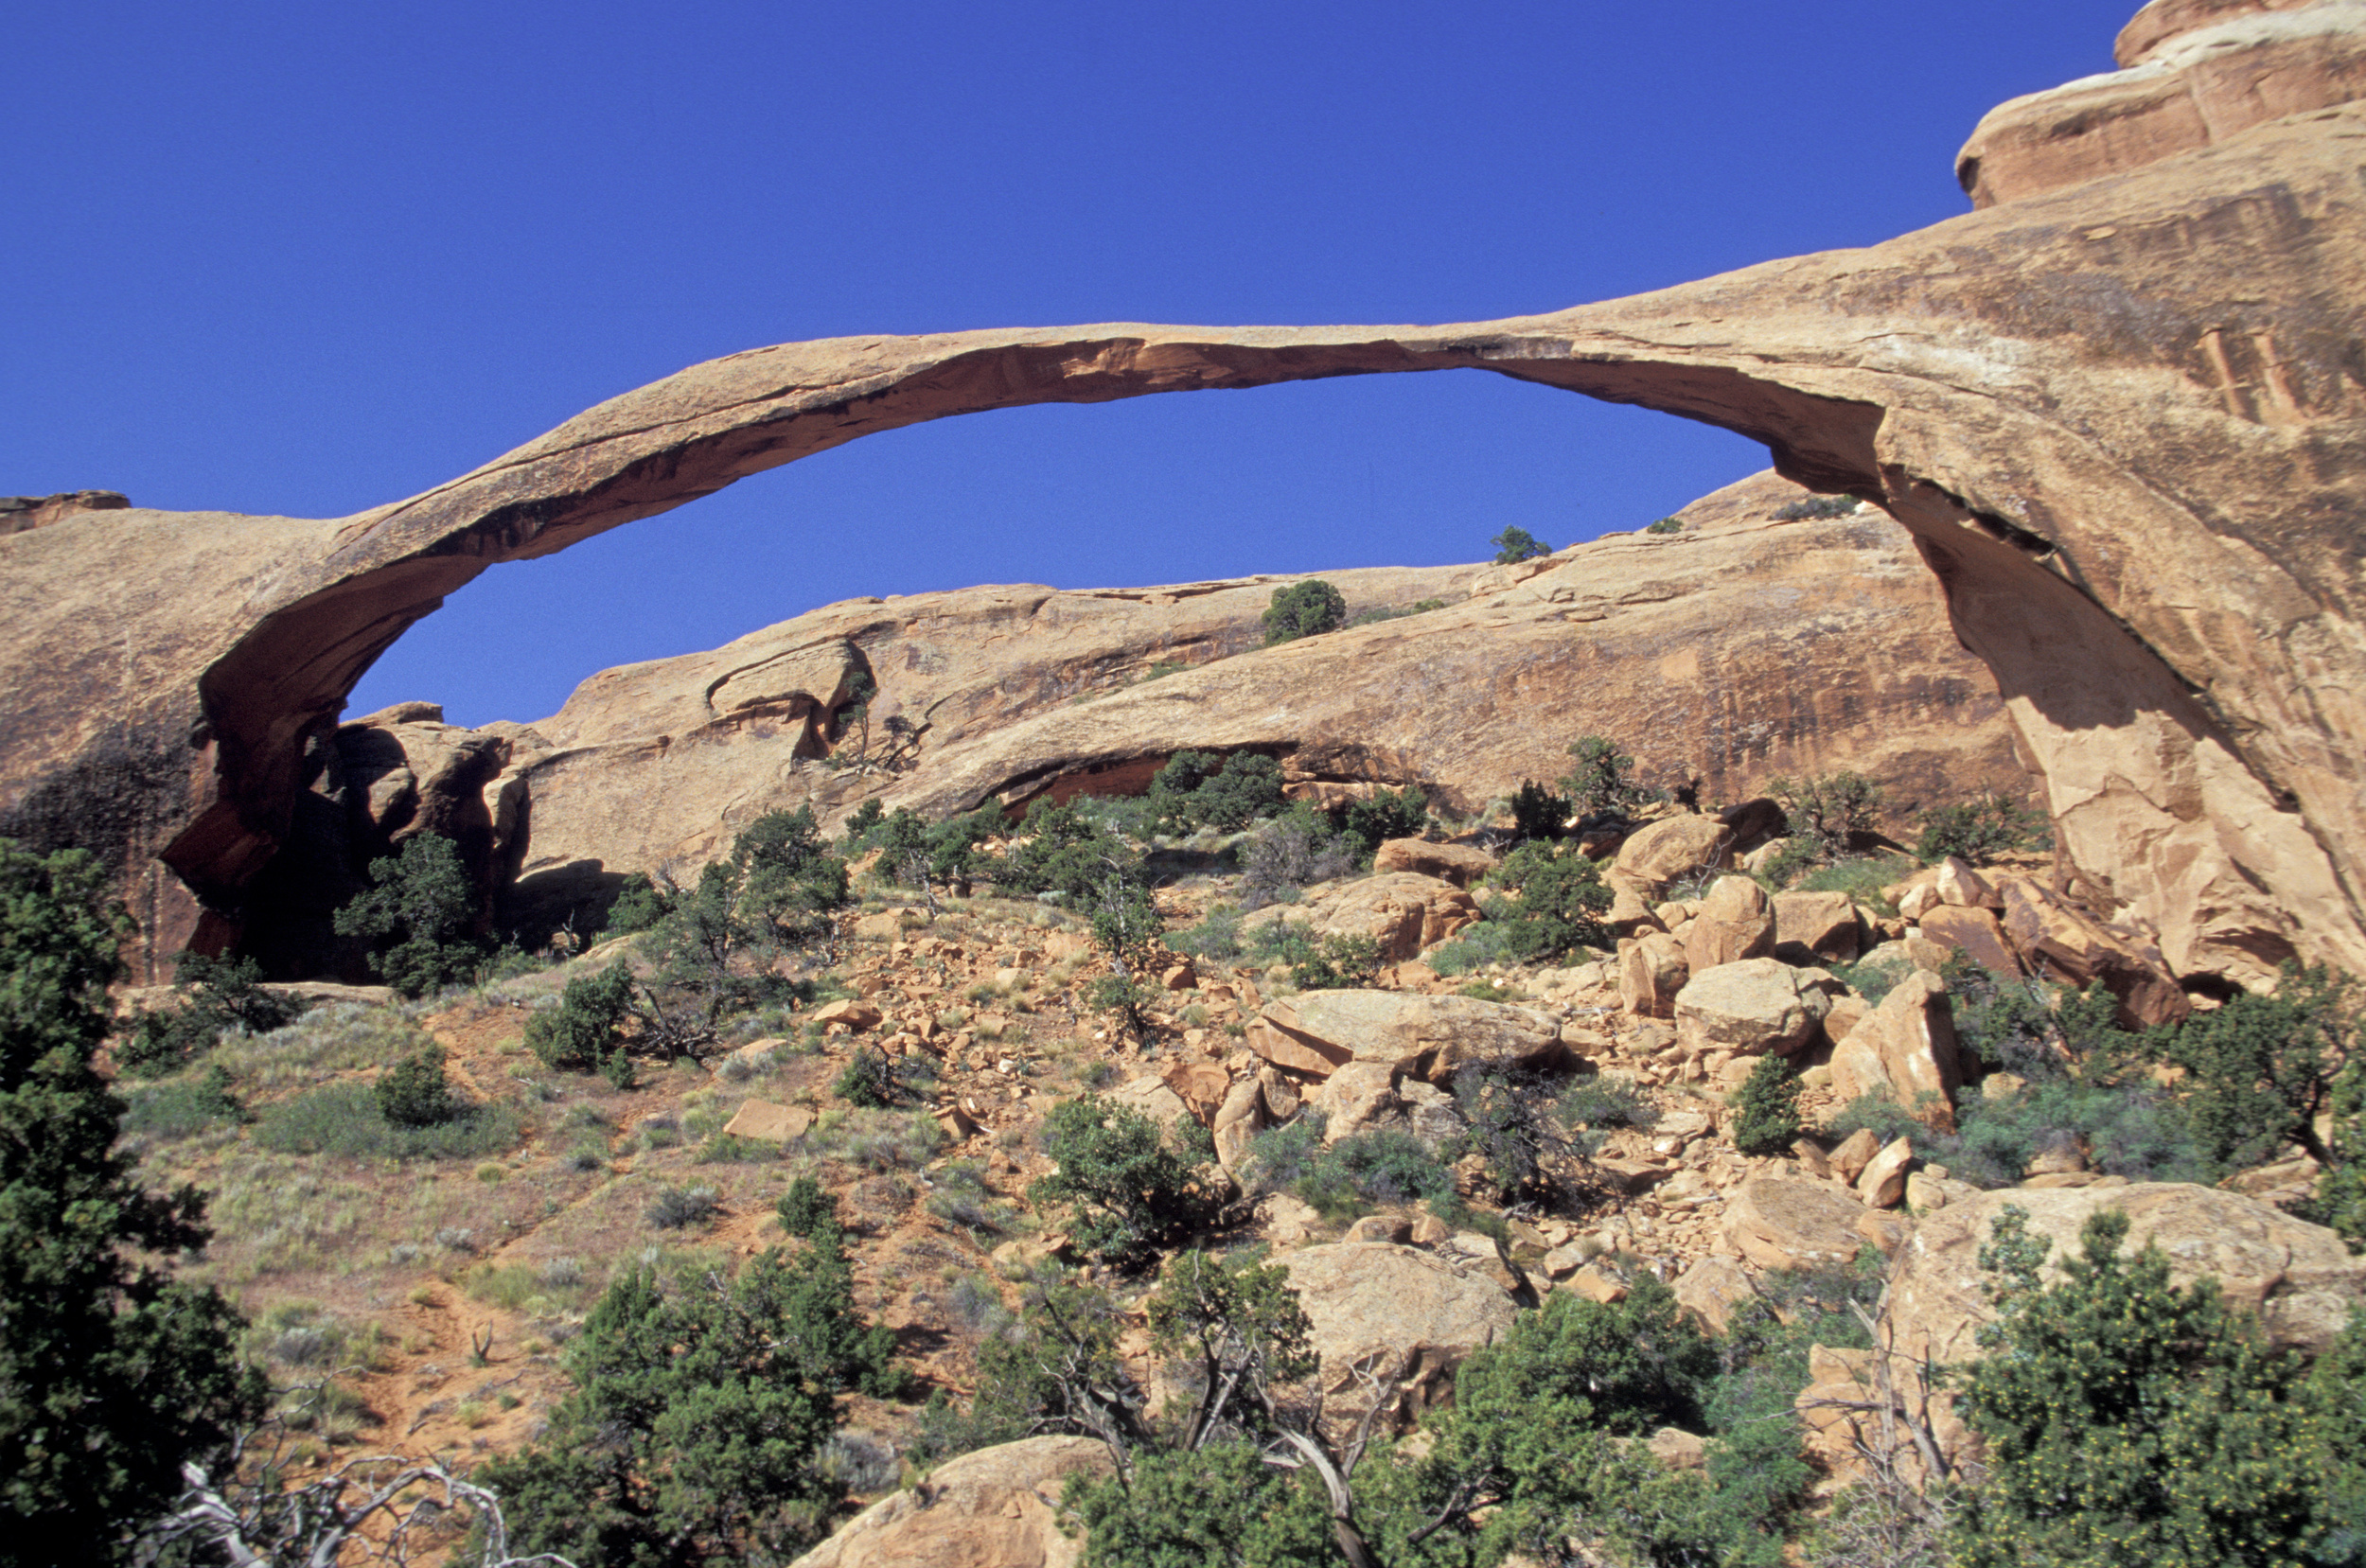 <p>The two main attractions on this hike are a couple of rock formations. First, there's Landscape Arch, a 90-foot arch that spans across the horizon like a contrail. Then, there's Double O' Arch, a 30-foot arch that stacks two arches on top of each other like pancakes. Both are worth checking out. So are the many trails along the way. </p><p>You may also like: <a href='https://www.yardbarker.com/lifestyle/articles/20_ways_to_make_your_home_naturally_smell_amazing_010924/s1__35768840'>20 ways to make your home naturally smell amazing</a></p>